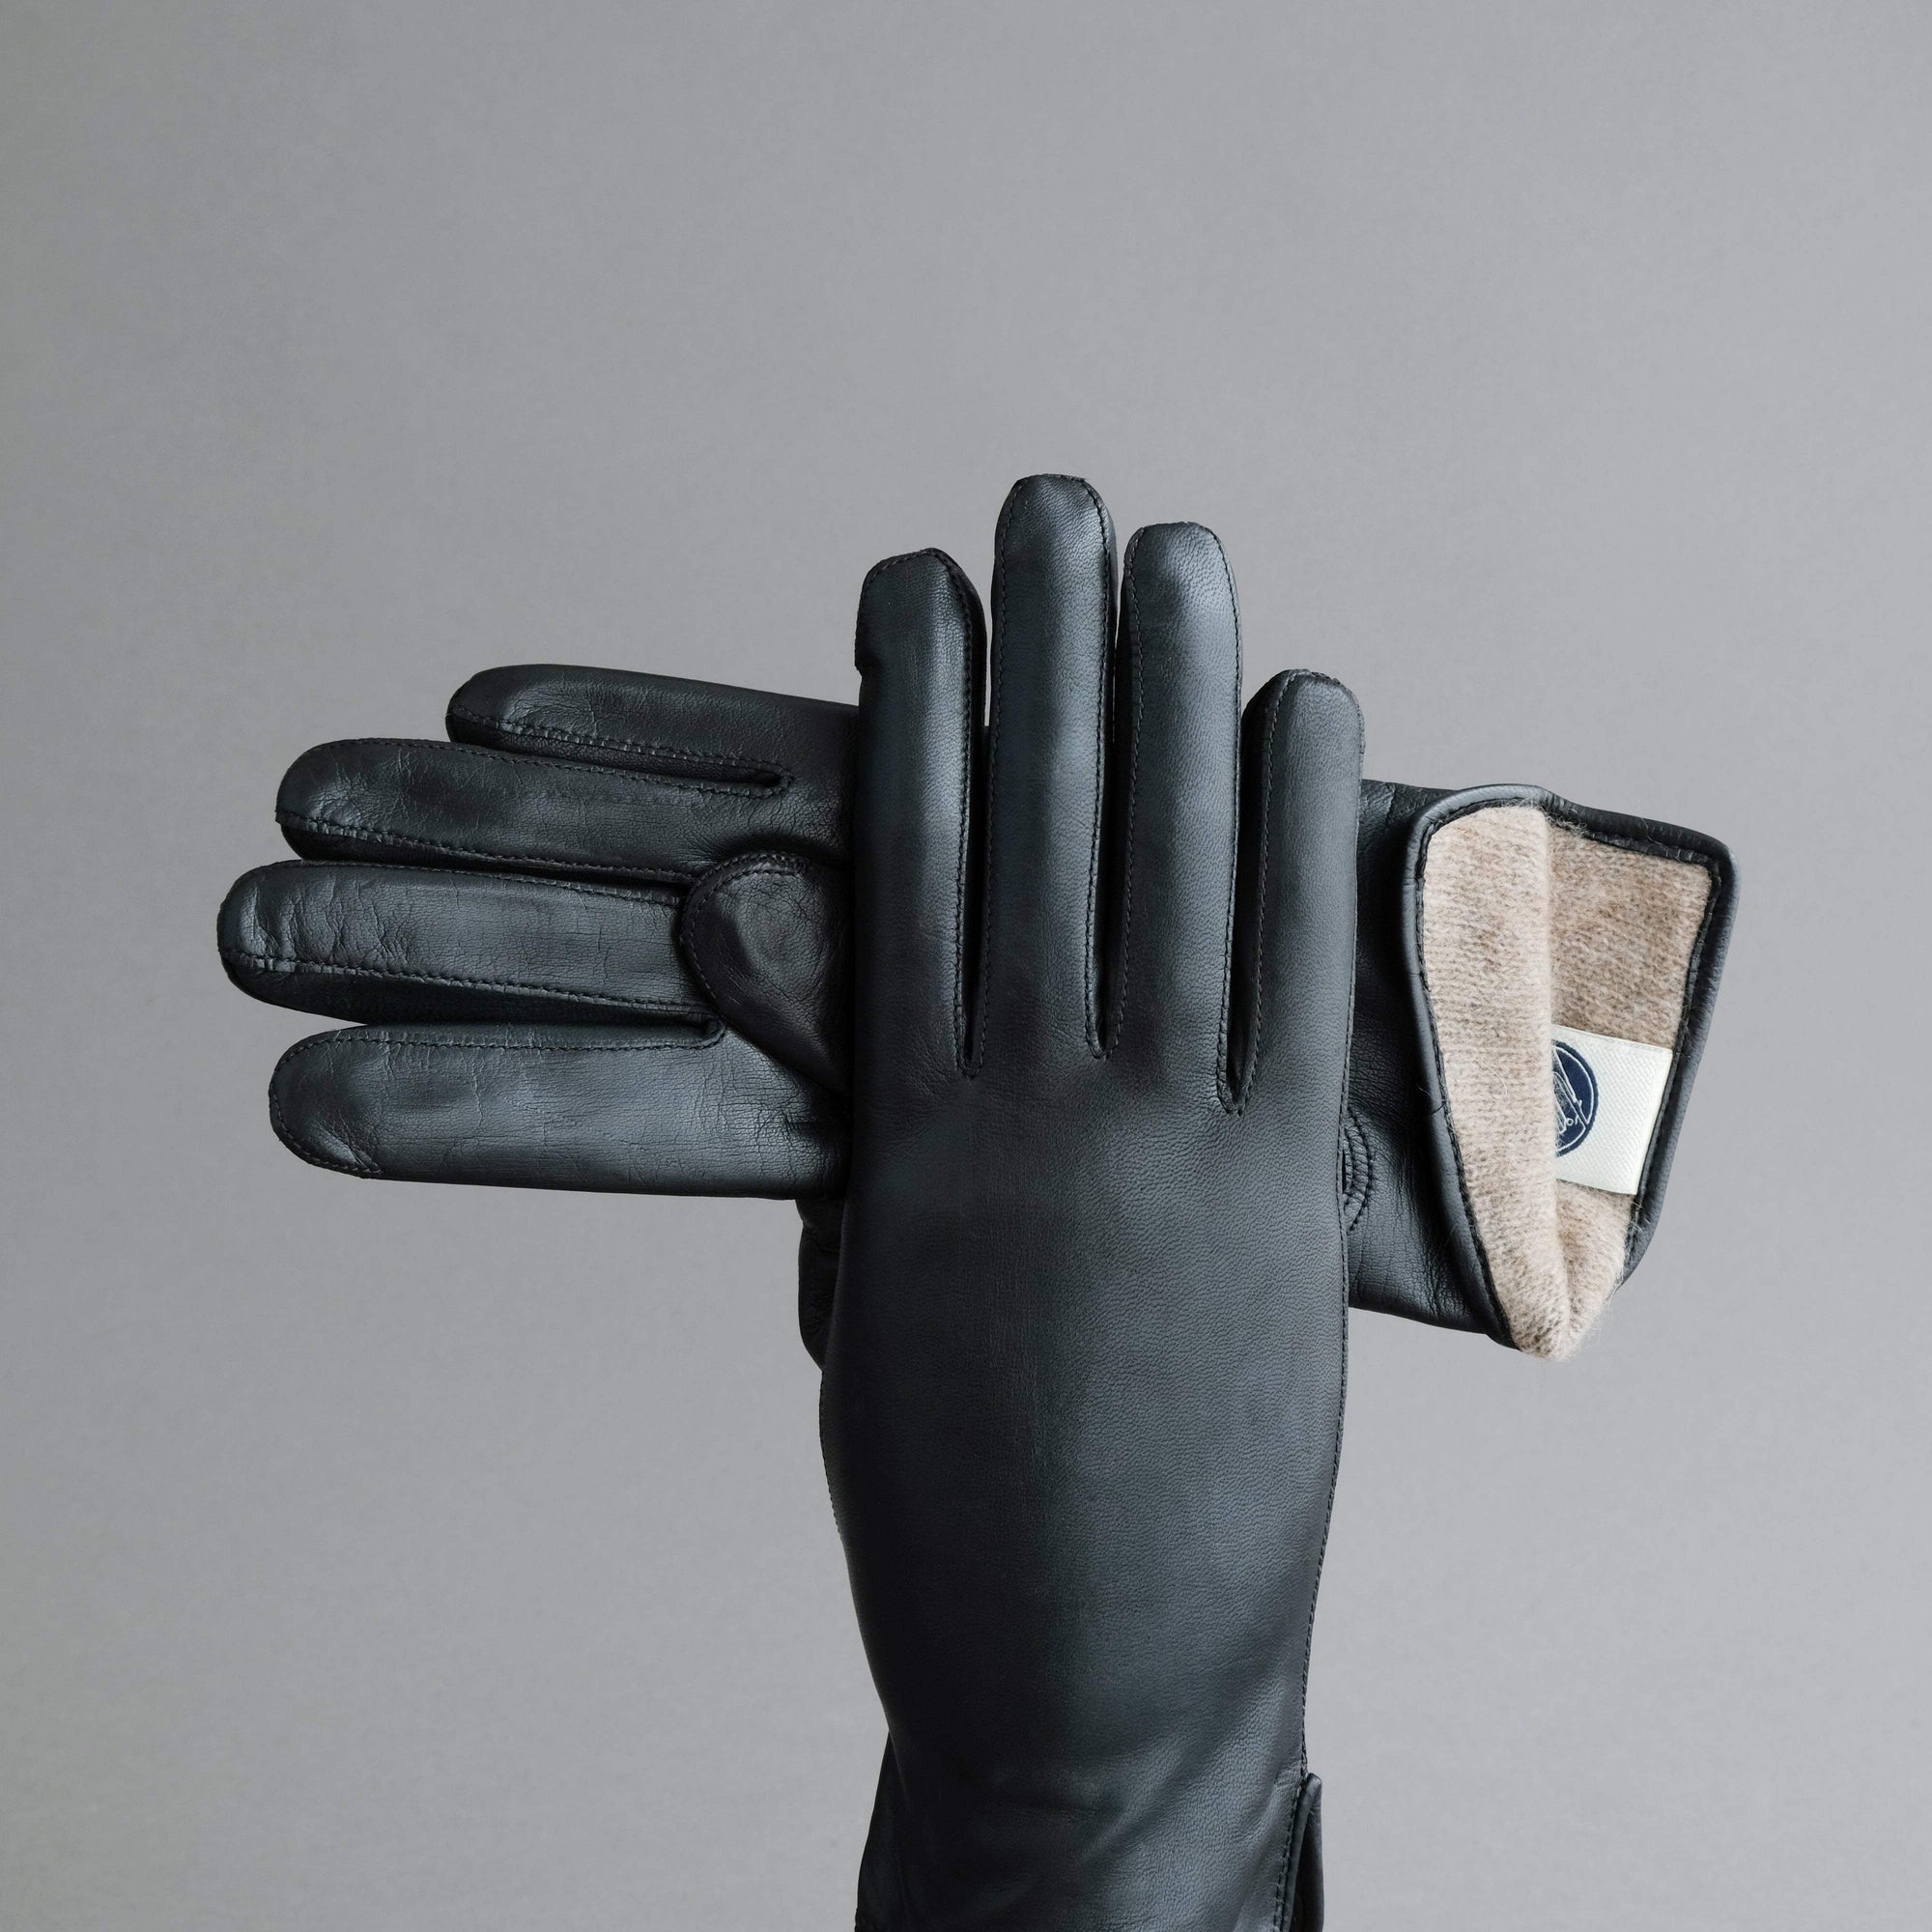 Ladies Gloves from Black Hair Sheep Nappa lined with Cashmere - TR Handschuhe Wien - Thomas Riemer Handmade Gloves